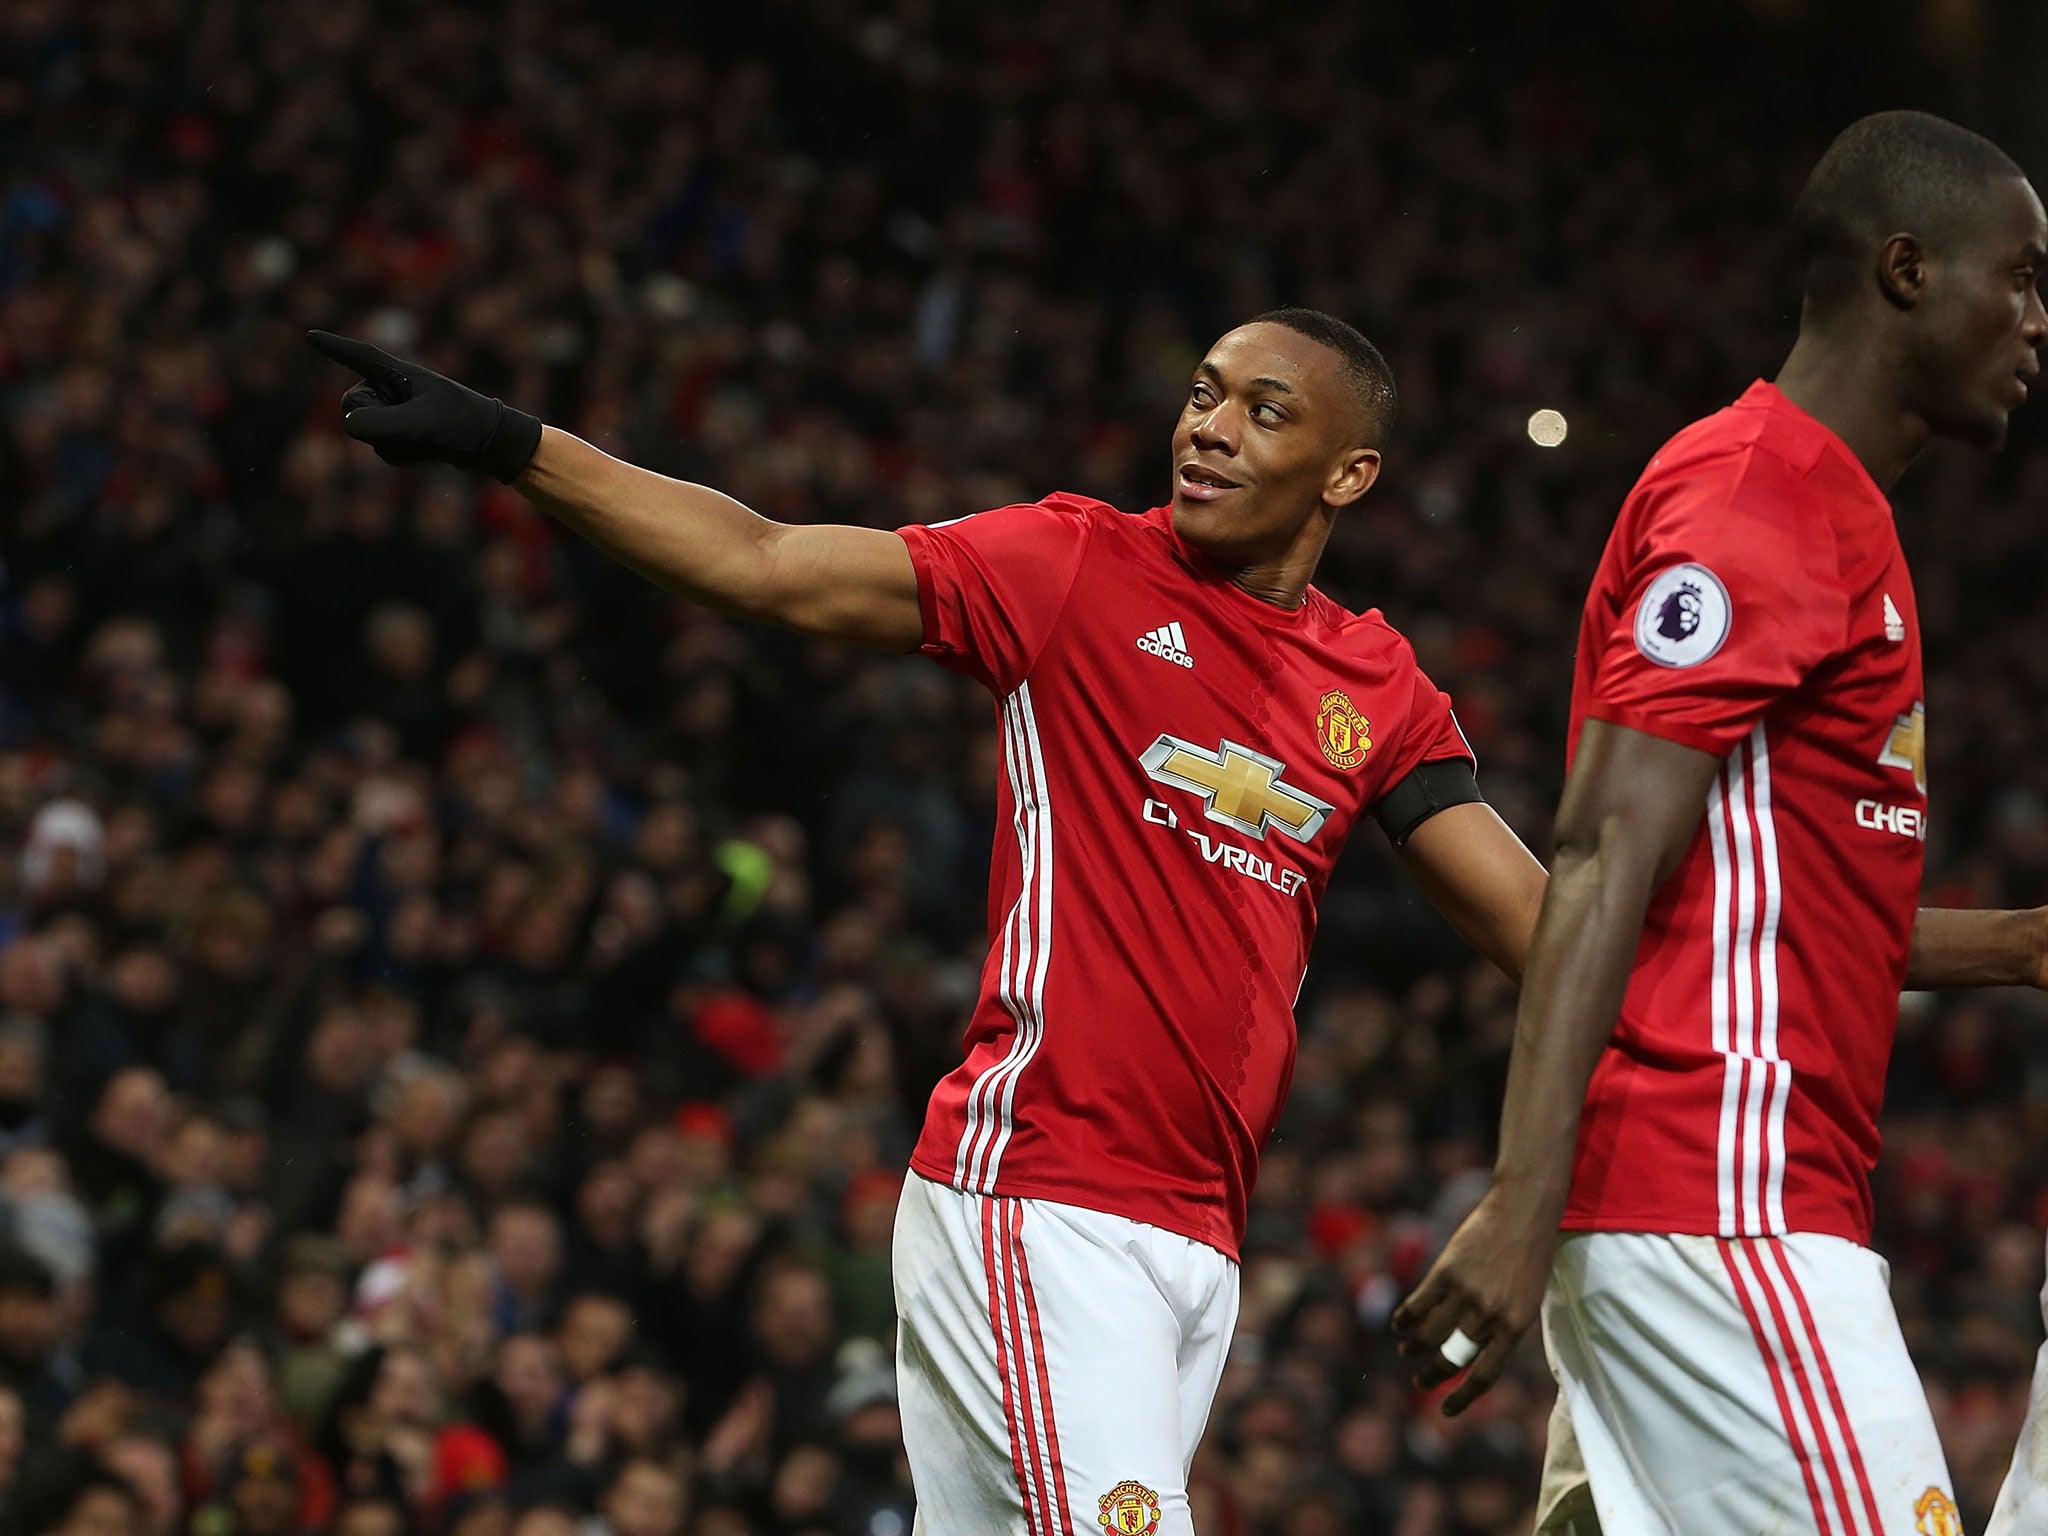 Martial celebrates after scoring against Watford at the weekend